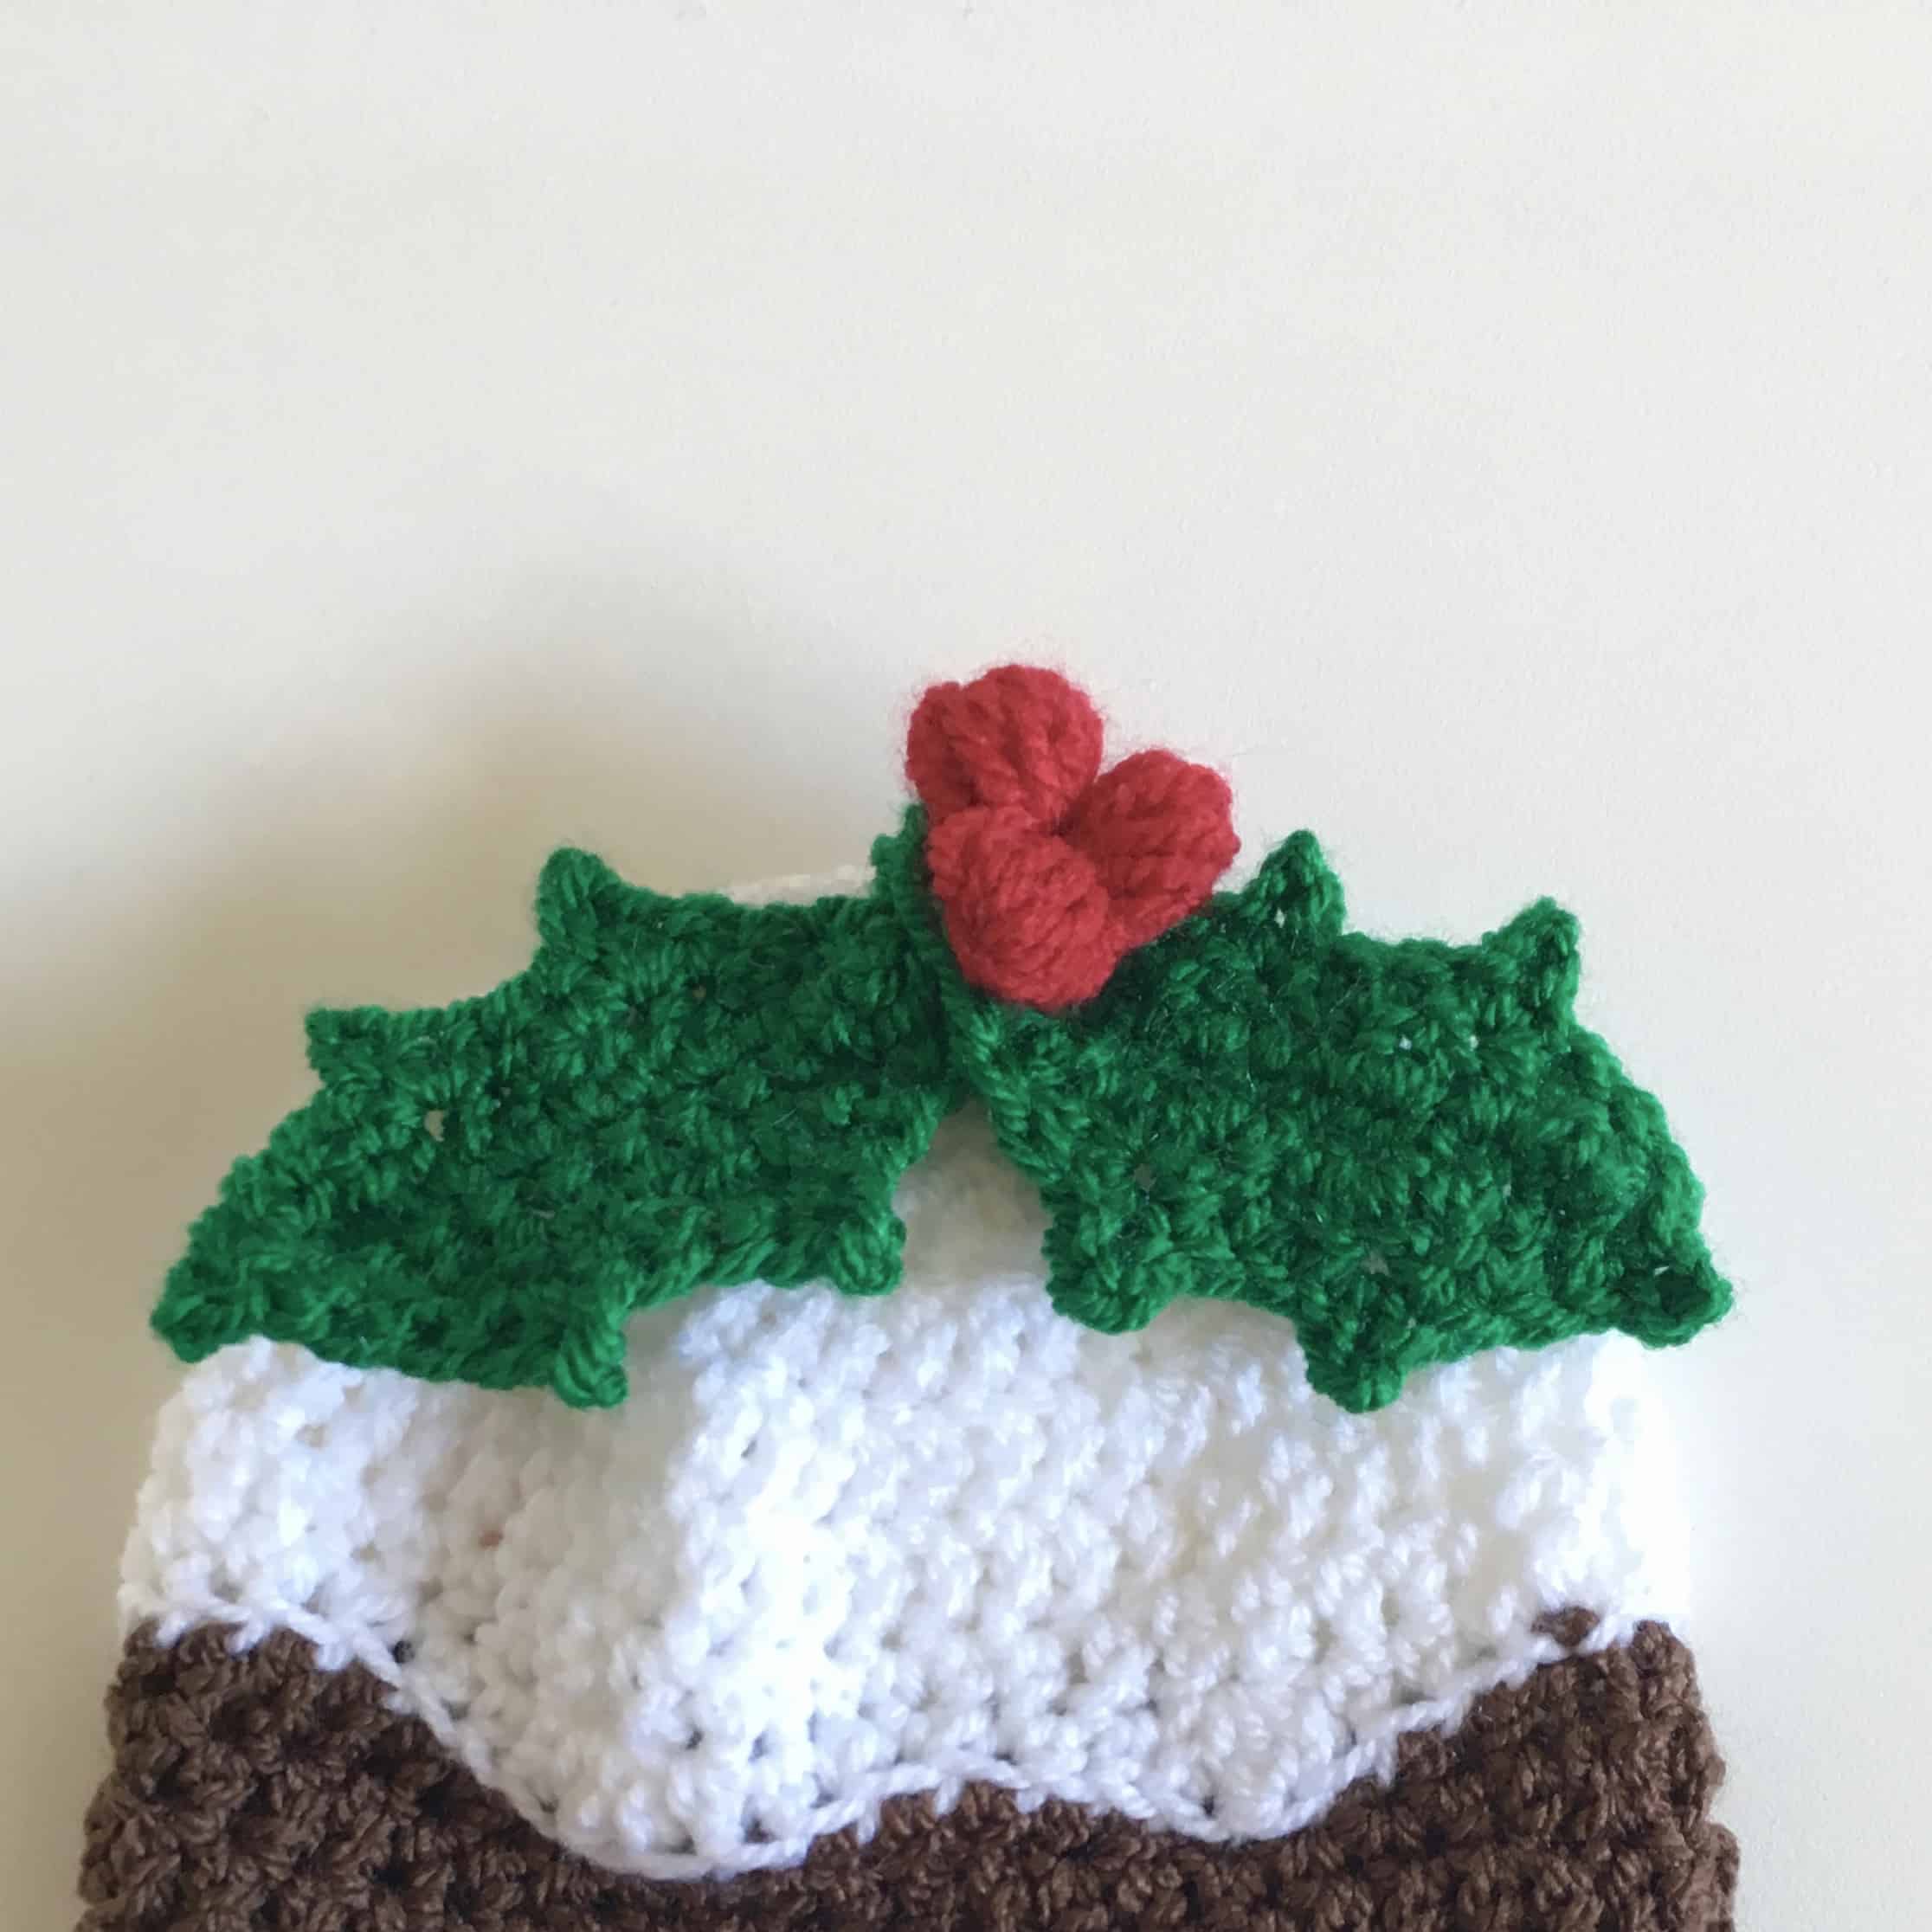 Christmas pudding crochet hat with holly sprig and berries